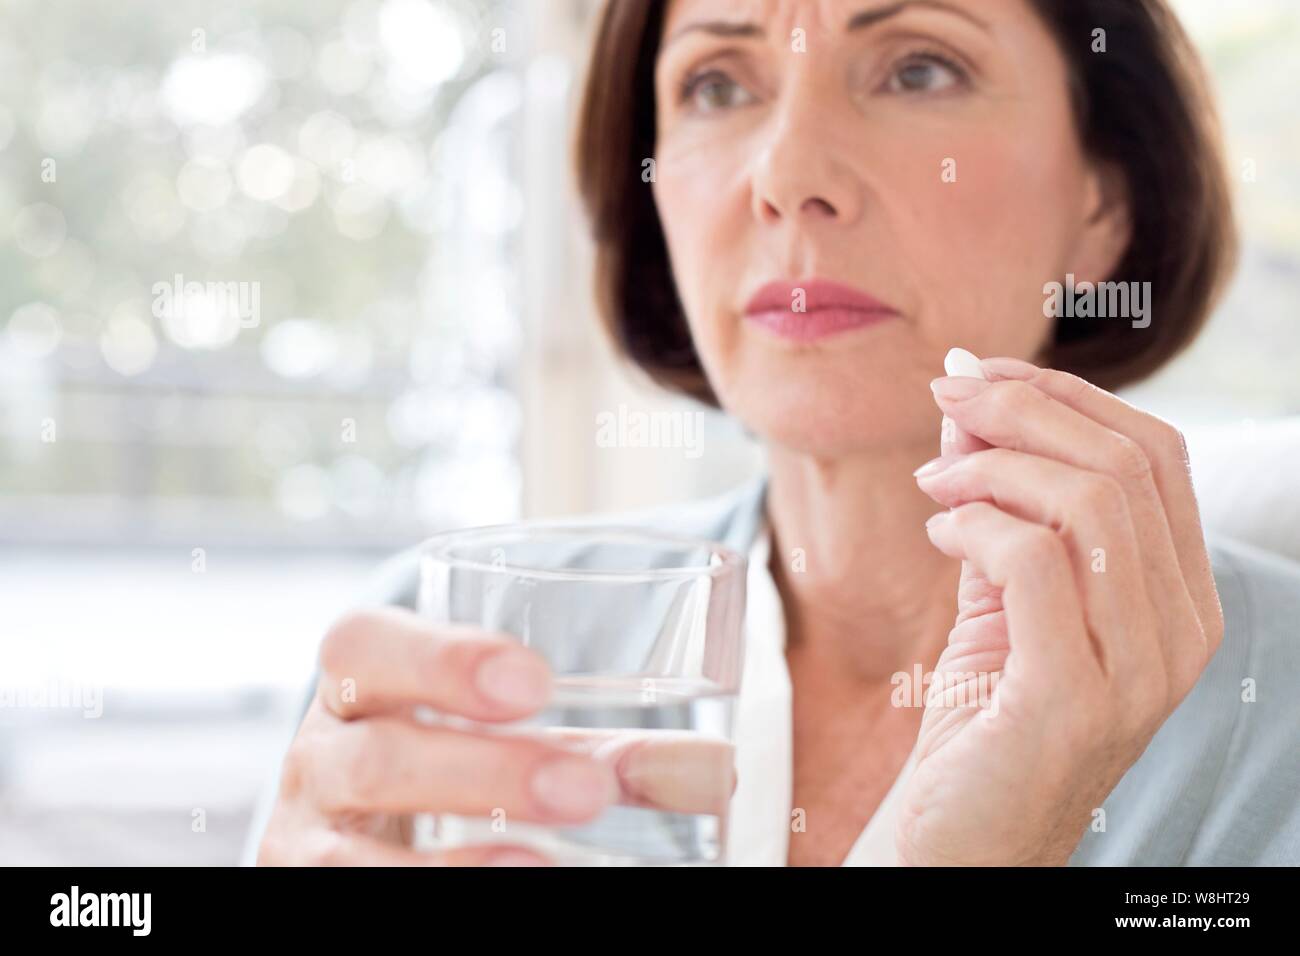 Mature woman taking tablet. Stock Photo